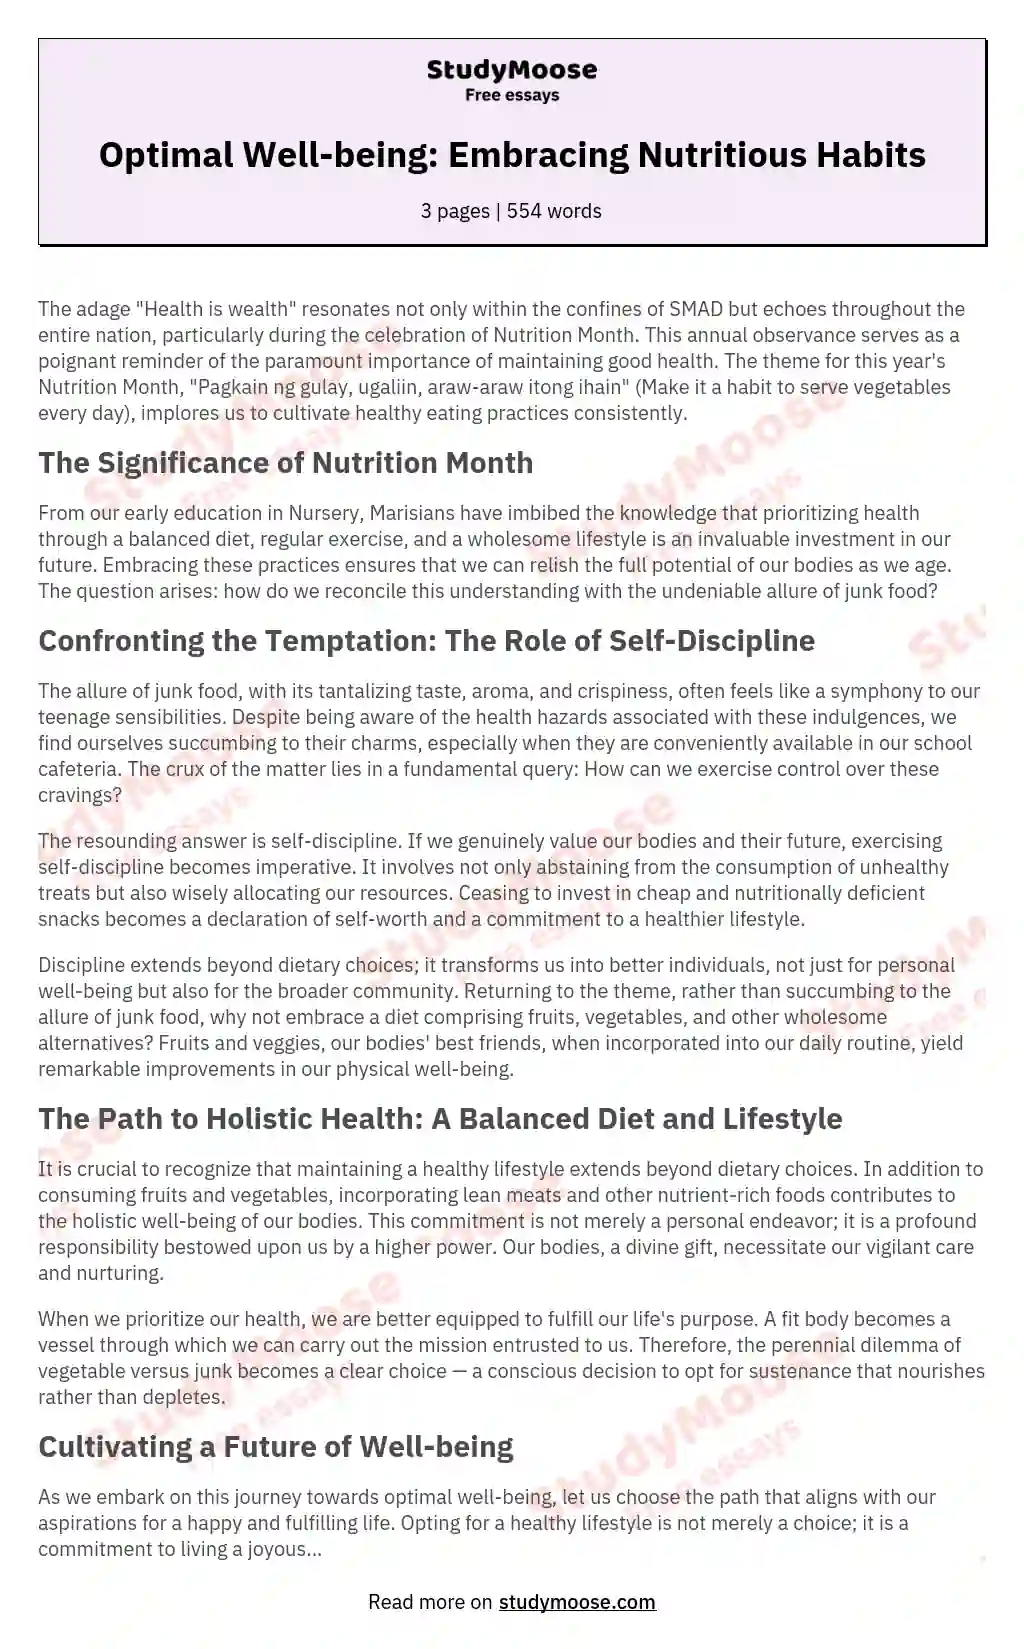 Optimal Well-being: Embracing Nutritious Habits essay